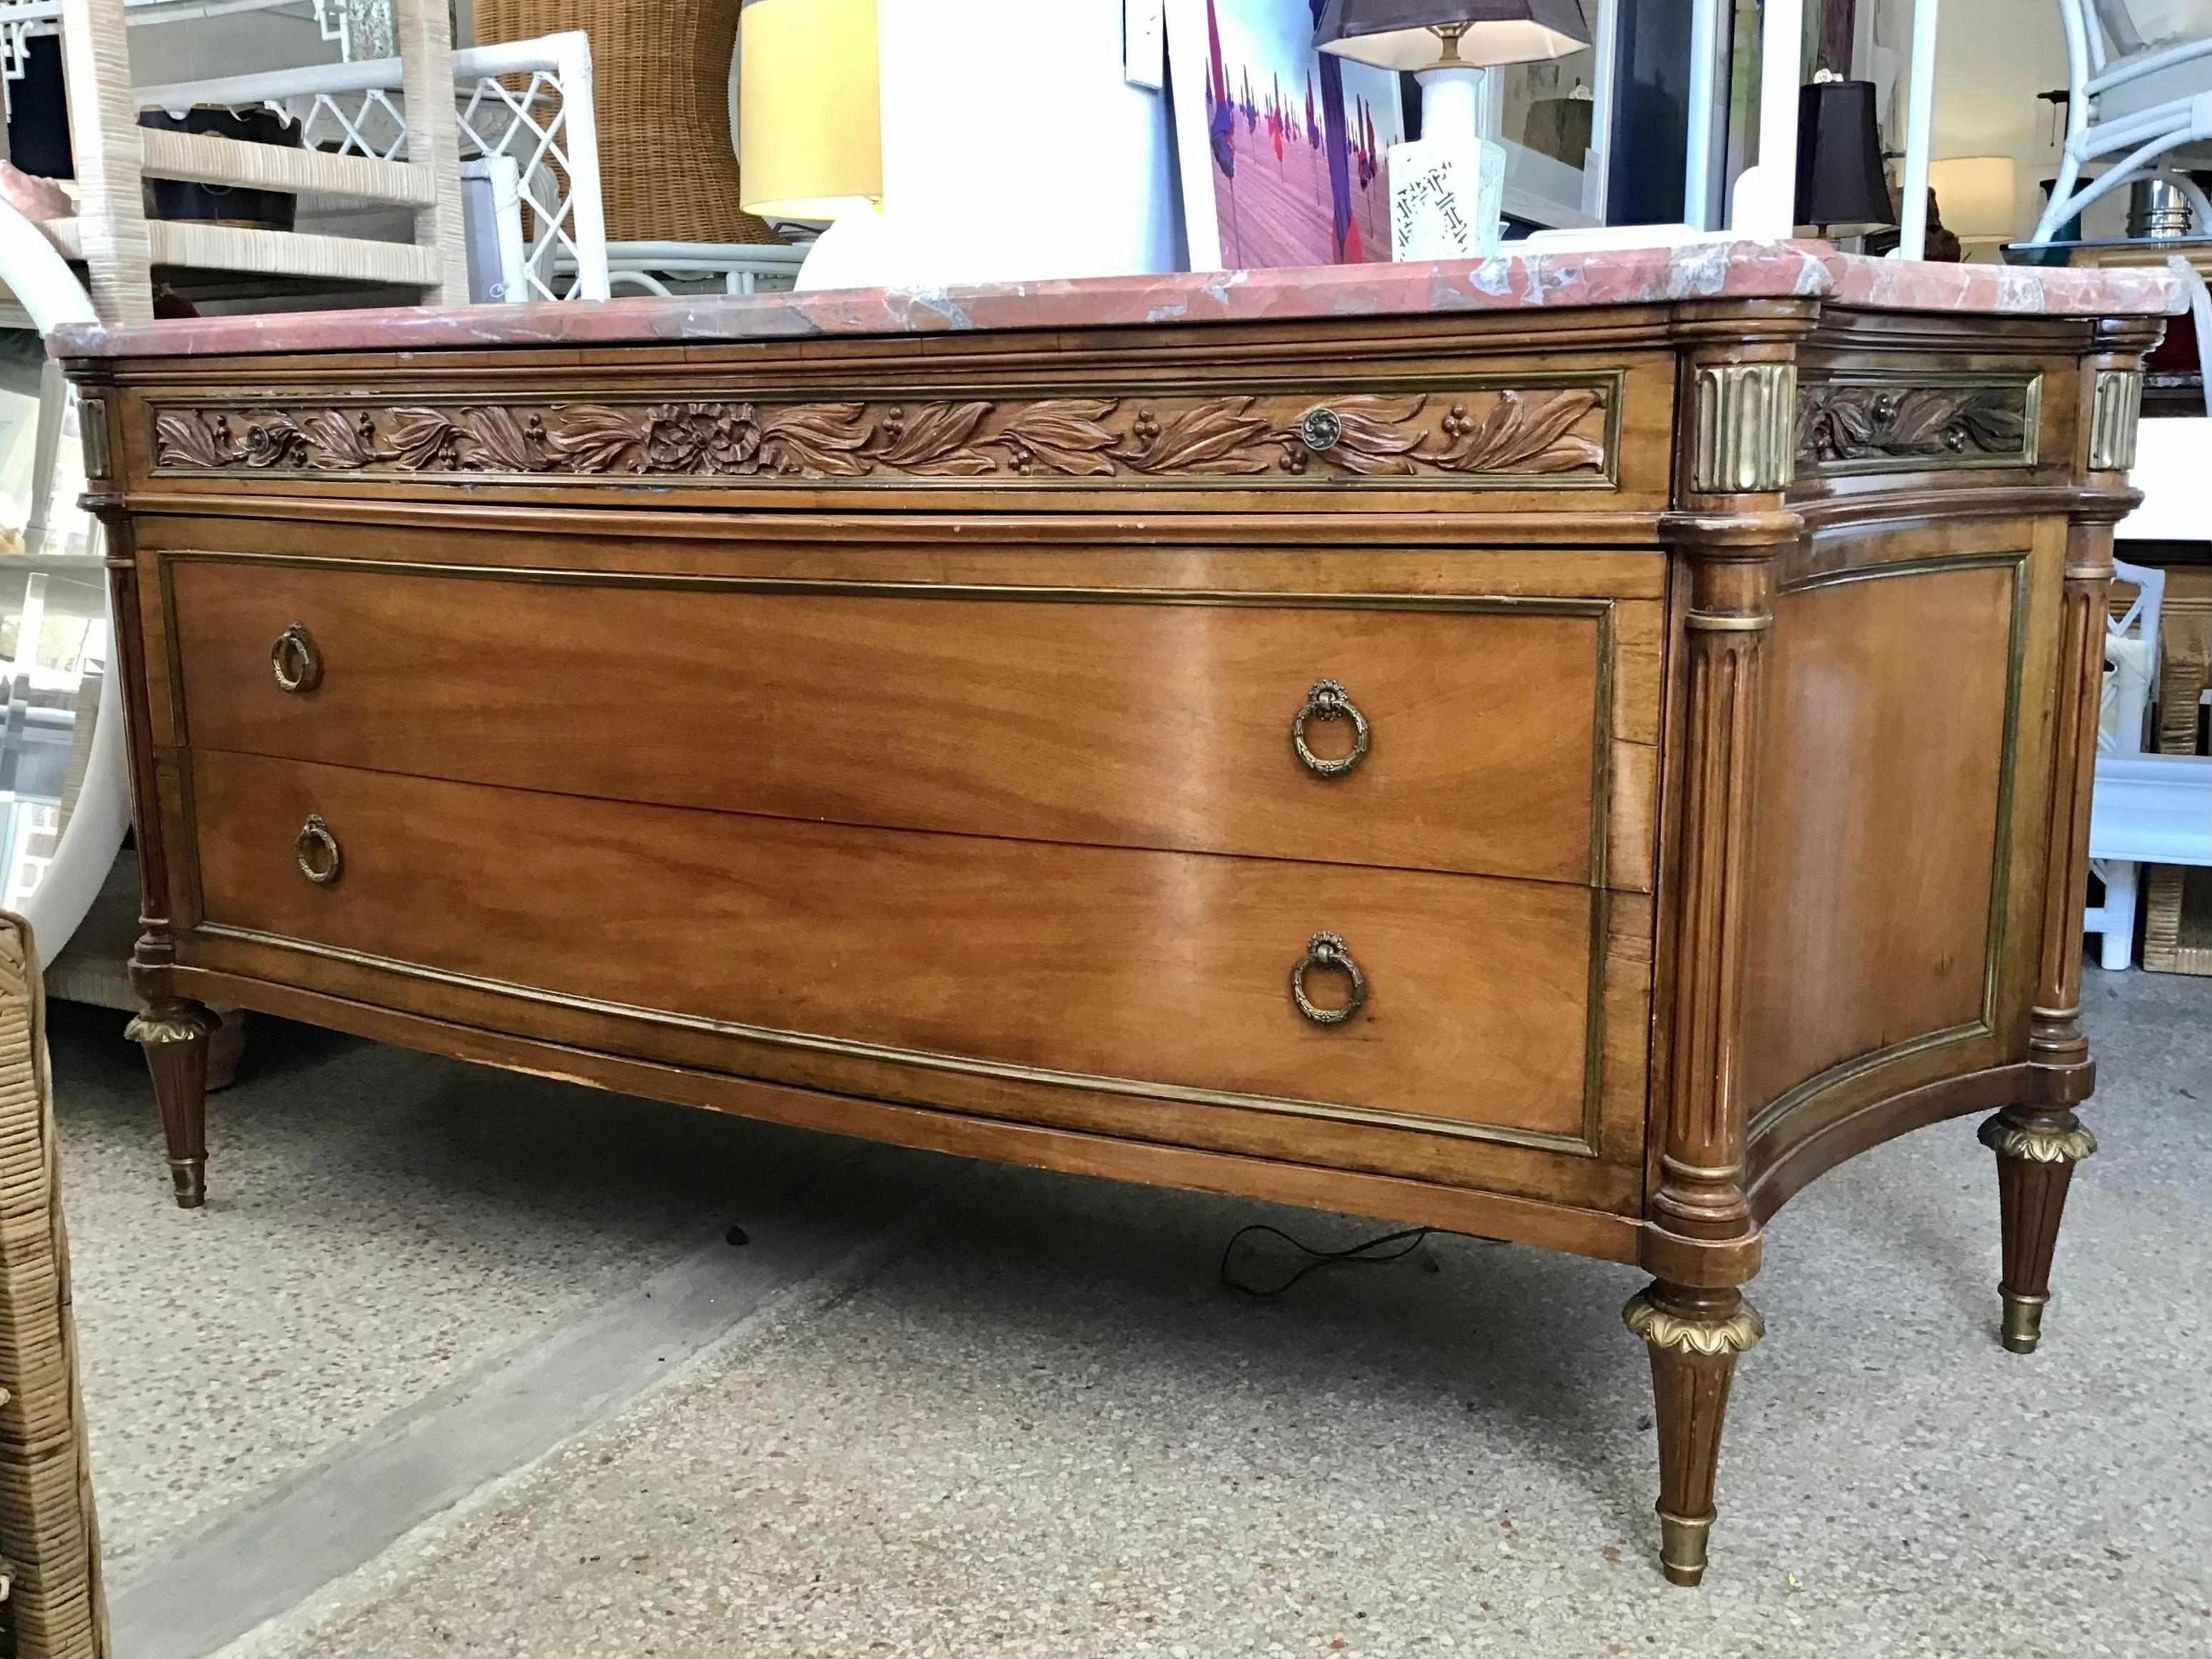 Wonderful French Jansen commode with marble top. This is unusually large and most likely custom made at 75